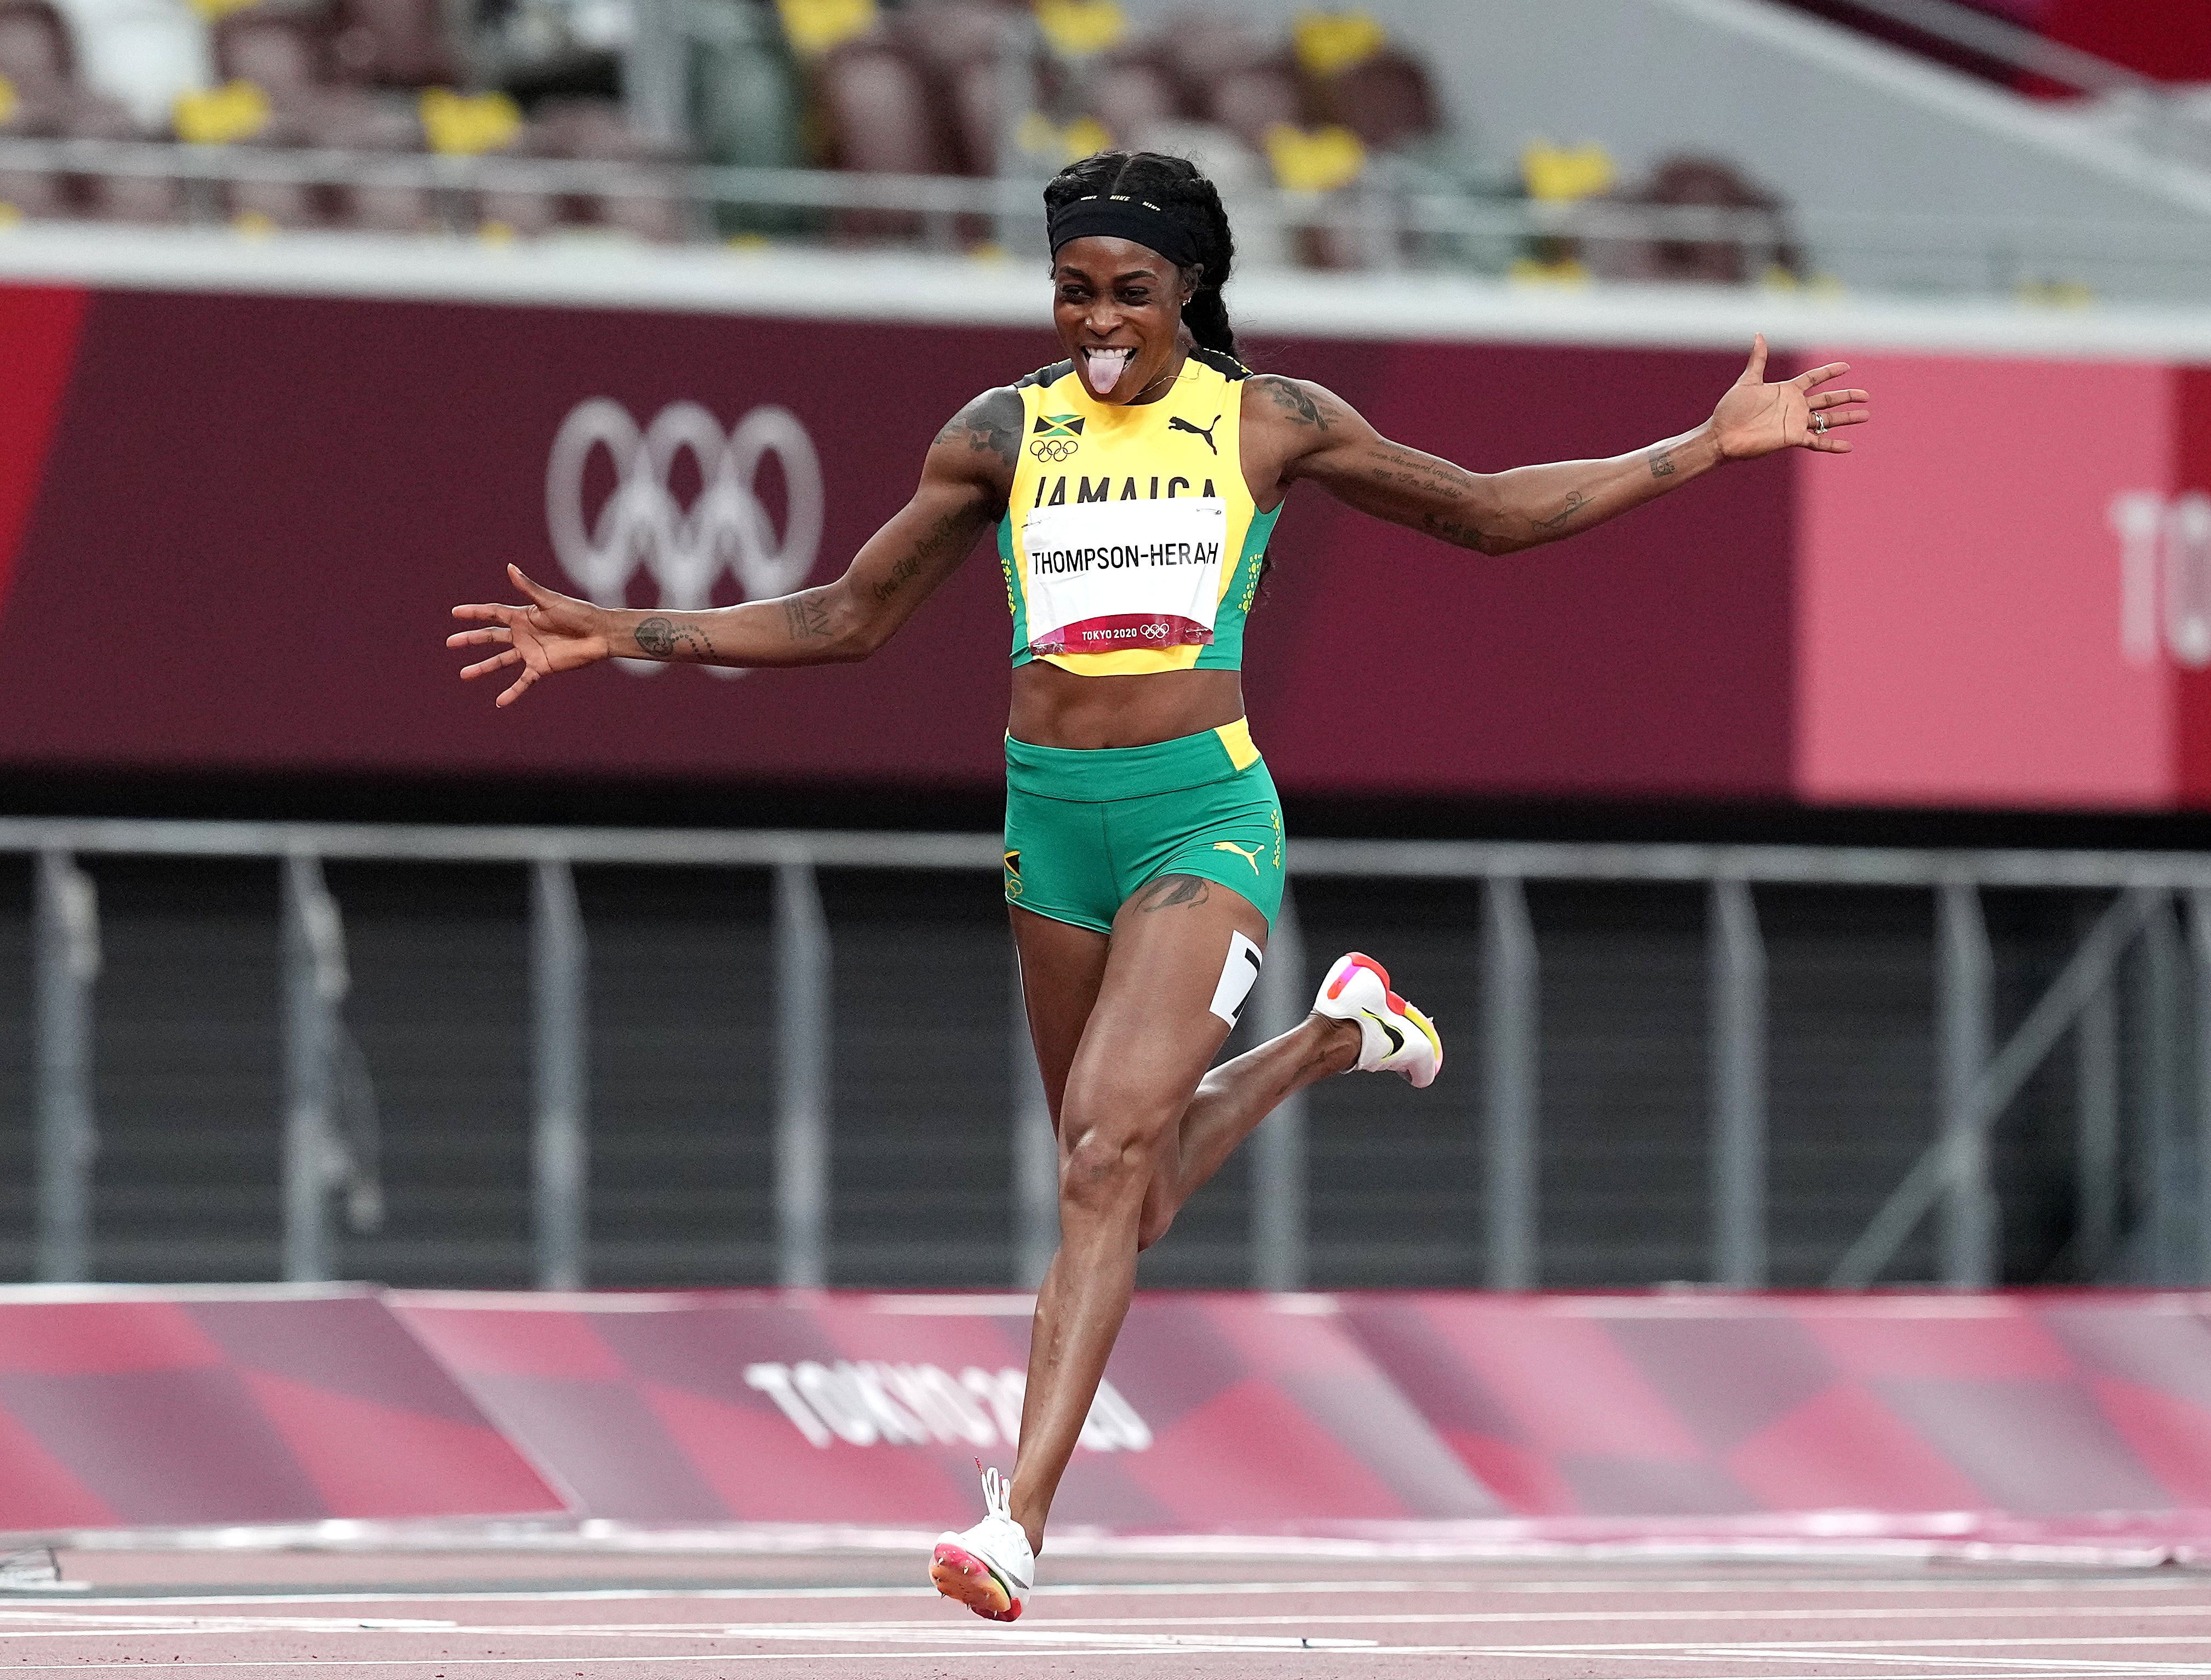 Elaine Thompson-Herah is among those to break records in Tokyo (Martin Rickett/PA)